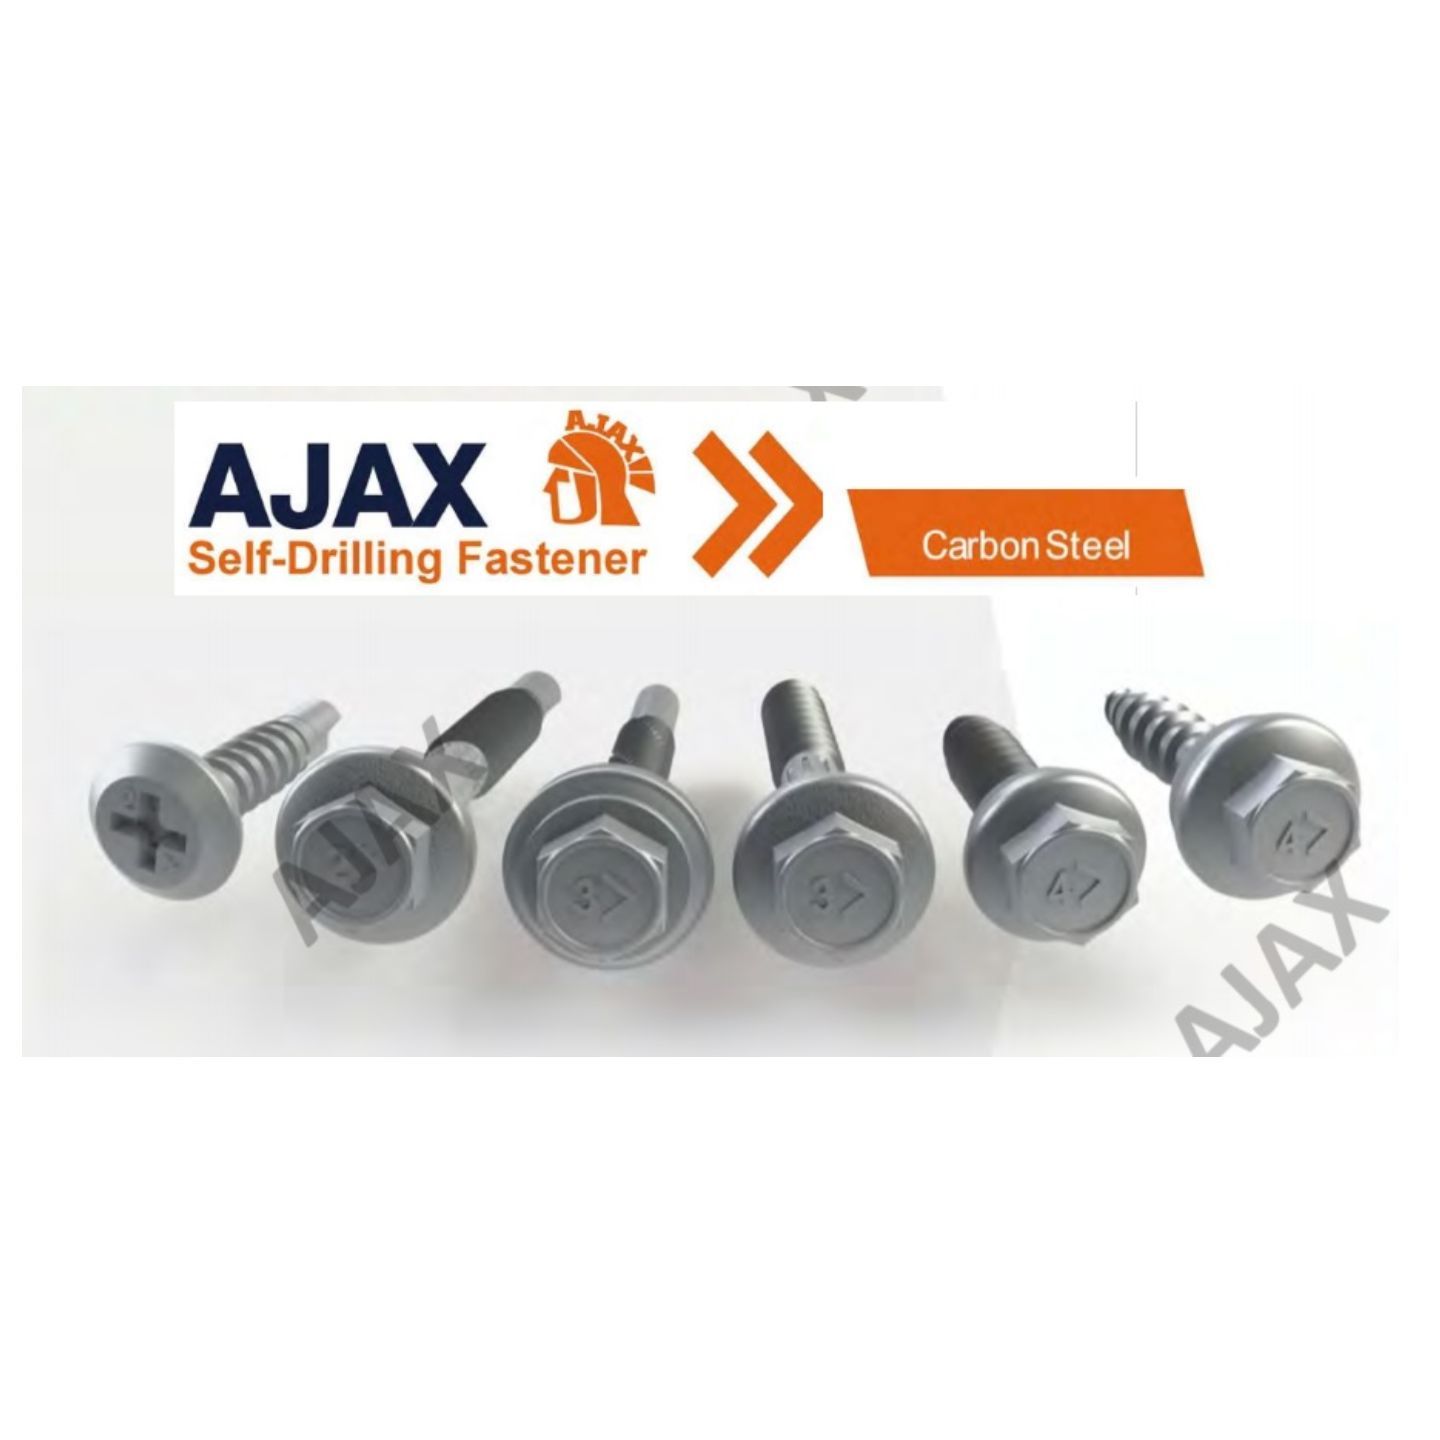 AJAX Carbon Steel Self-Drilling Screw (AS3566 CLASS 3) with a unique comformal coating technology